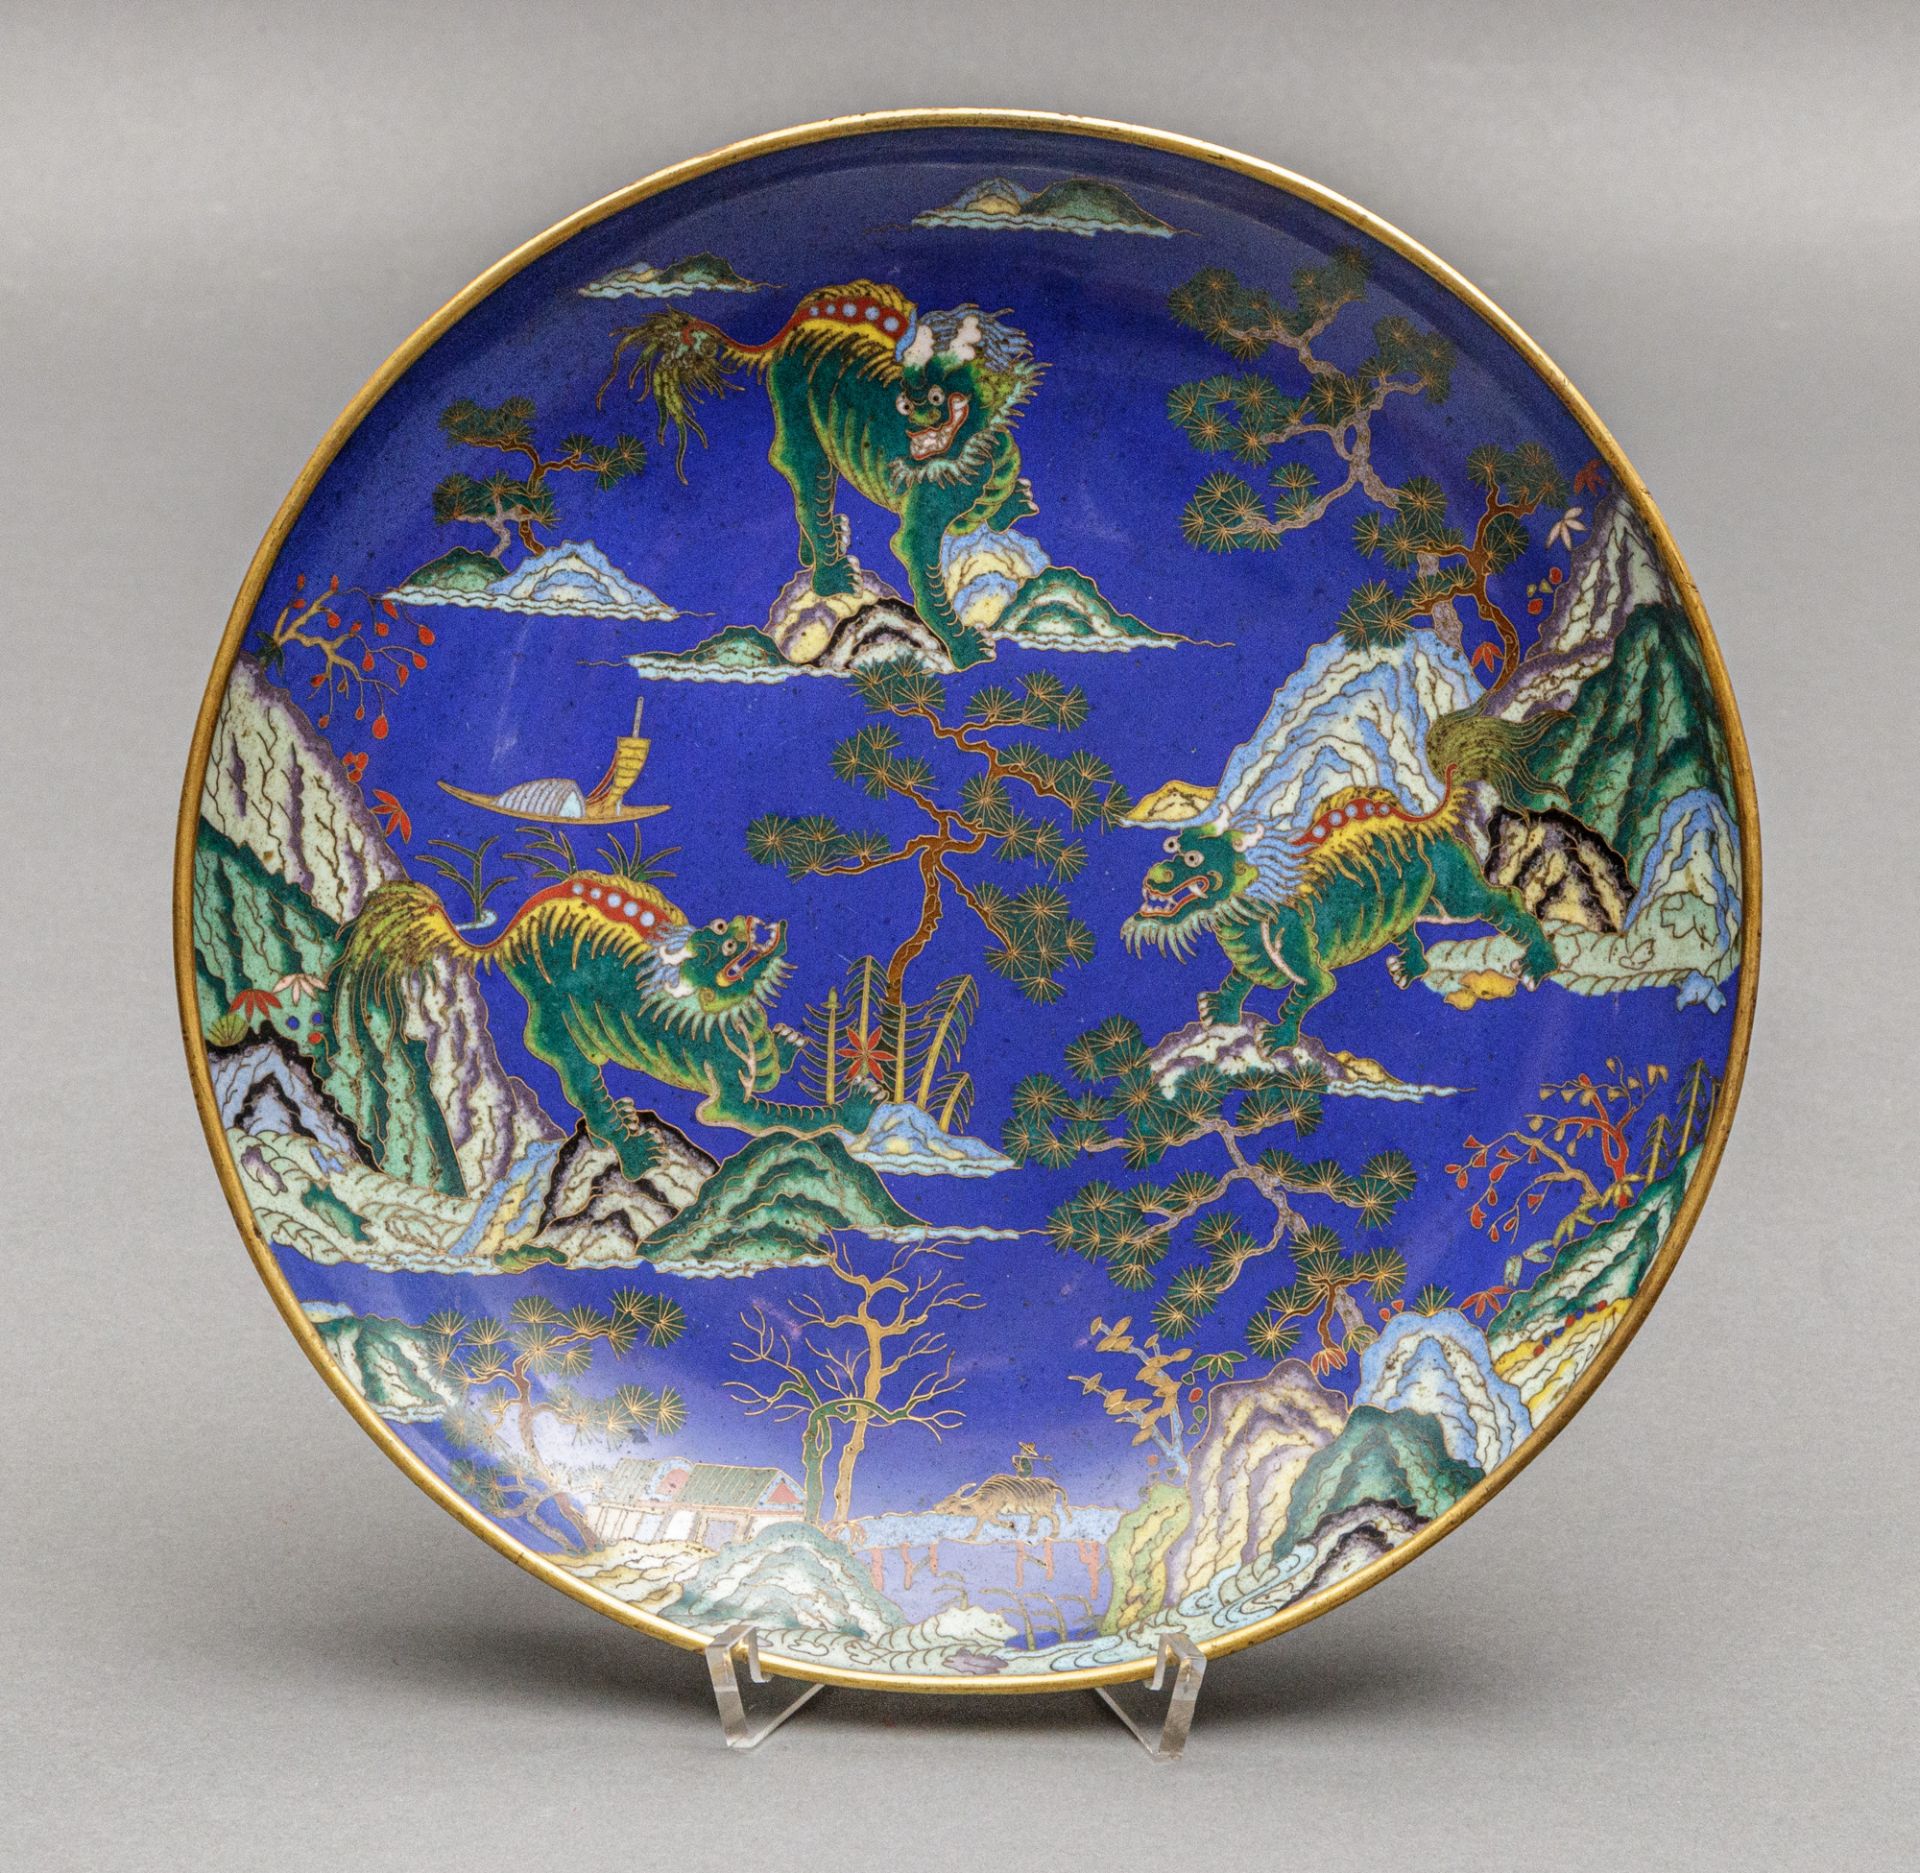 Paar Cloisonné Teller, China, wohl Qing Dynastie, 1644-1911 - Image 3 of 5